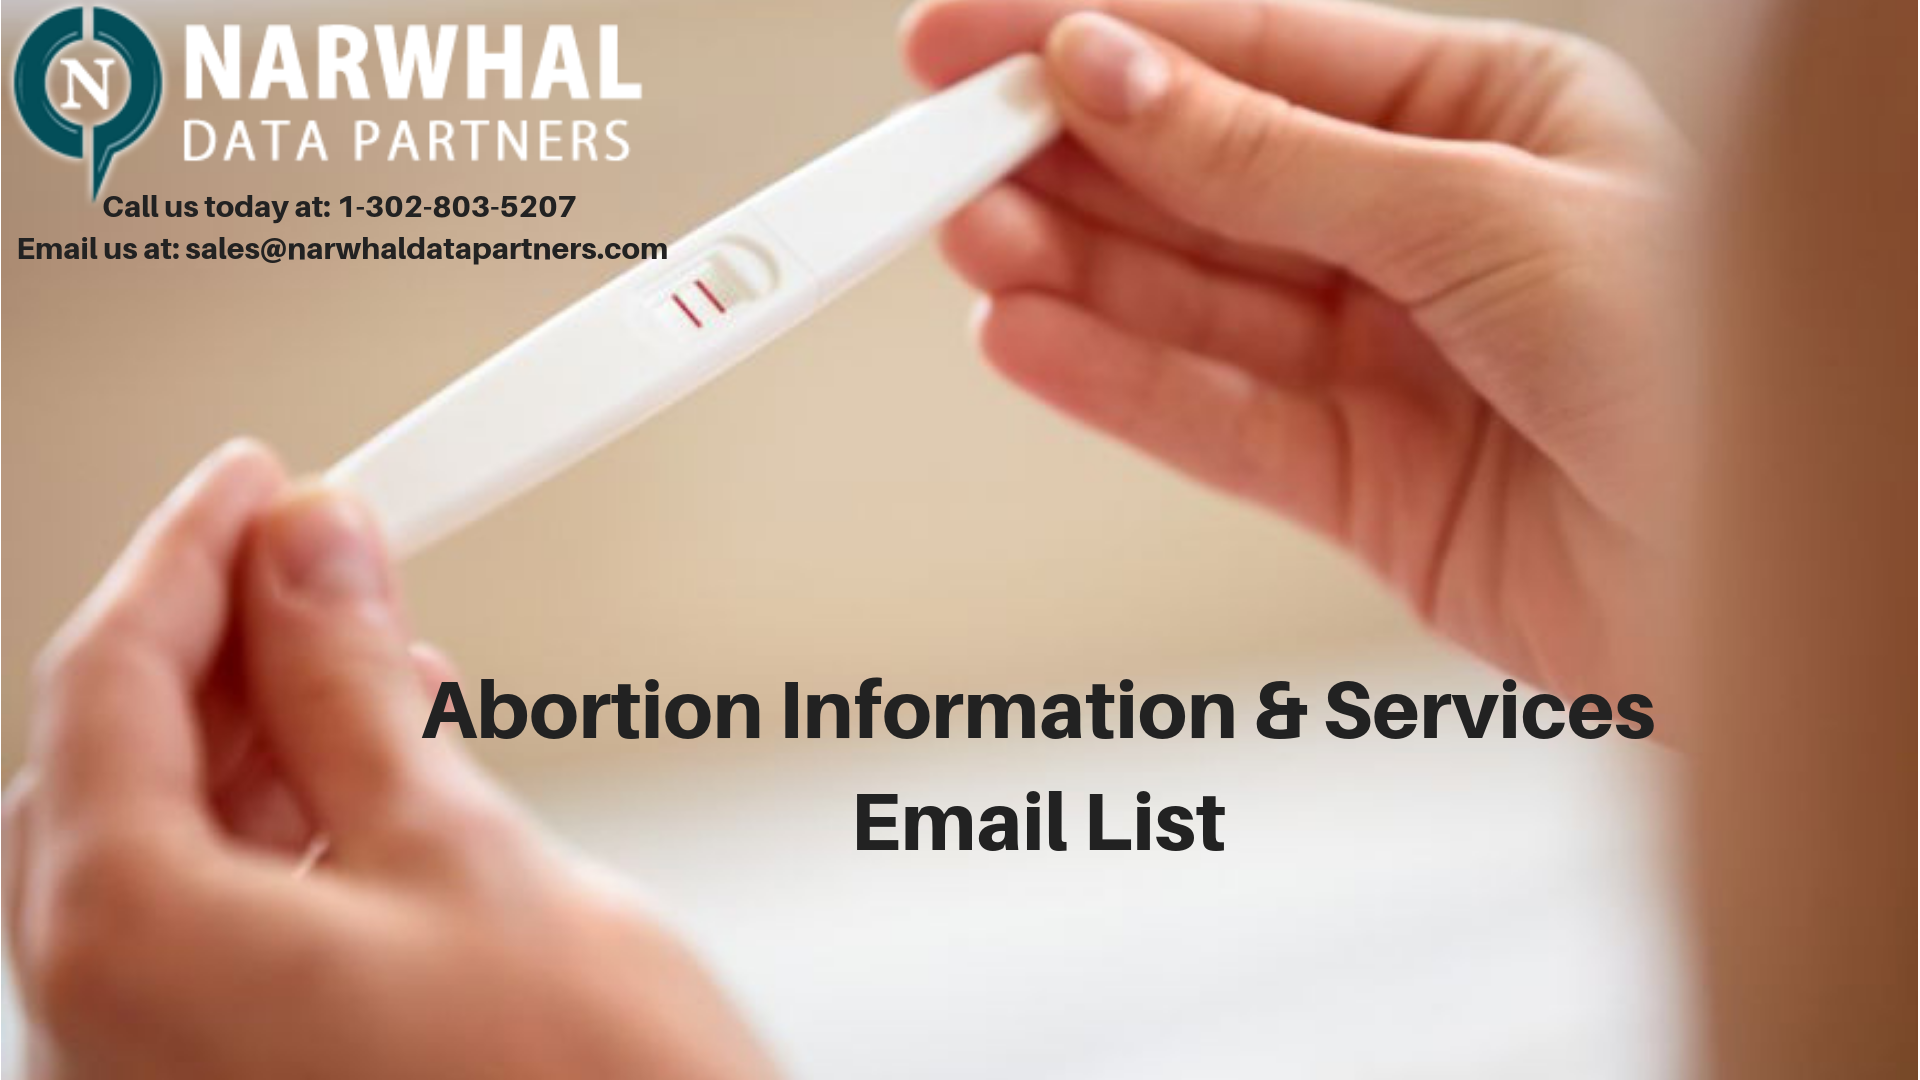 http://narwhaldatapartners.com/abortion-information-and-services-email-list.html